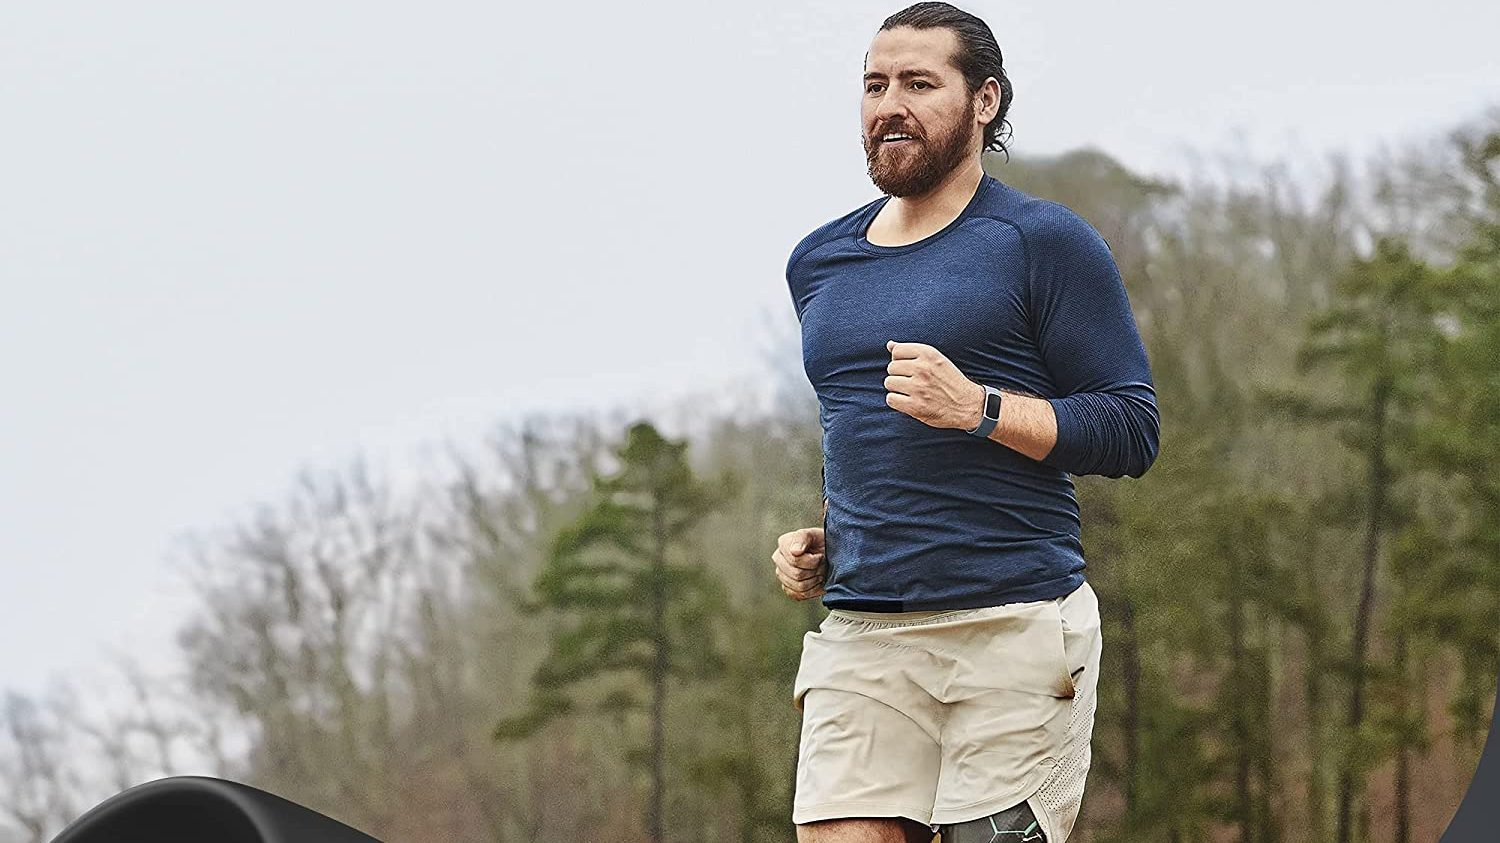 Man jogging with Fitbit on